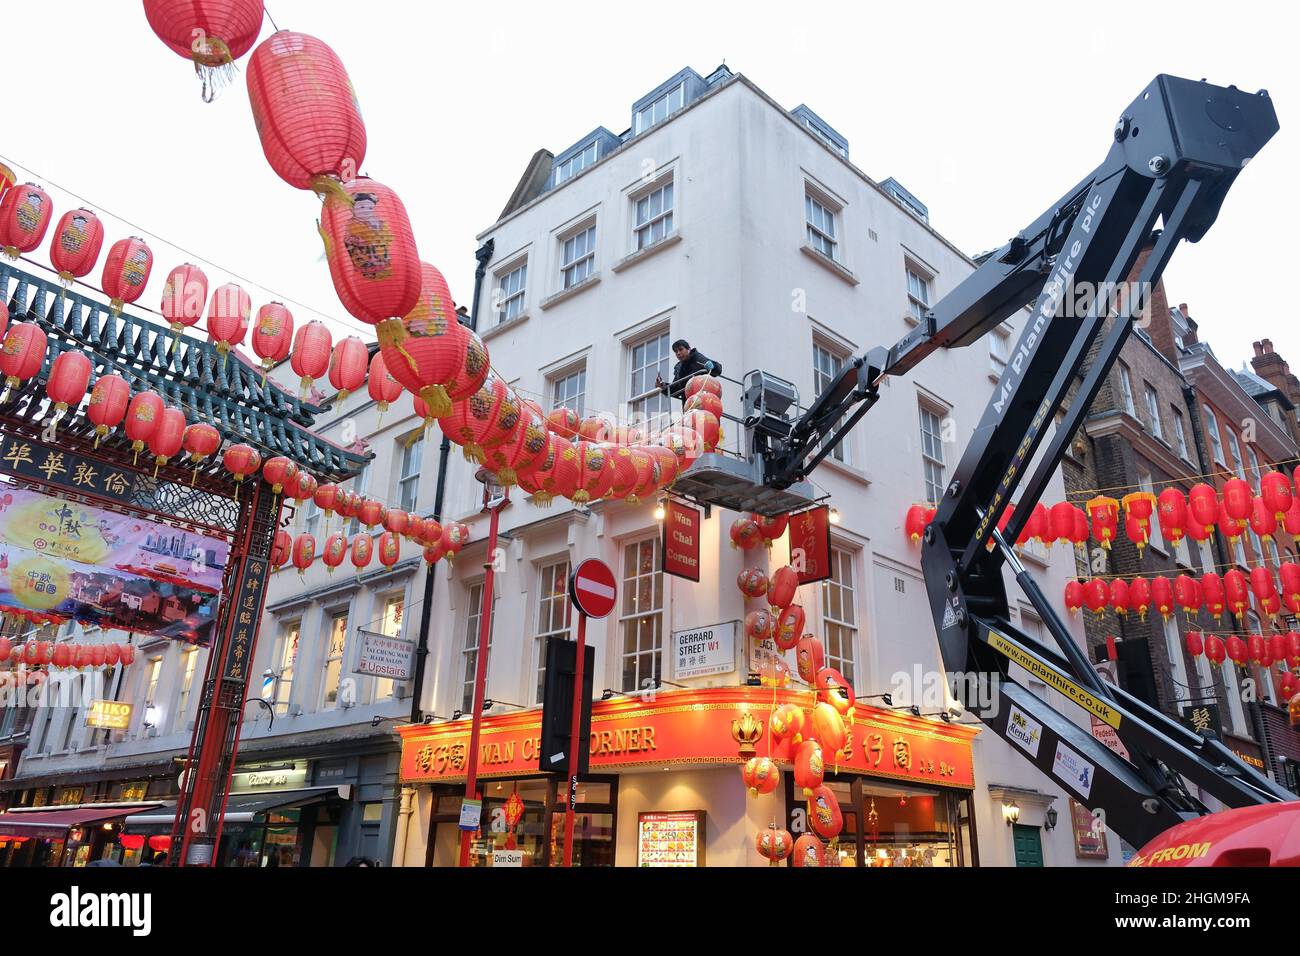 London, UK, 21st Jan, 2022. Workers in London's Chinatown take down the area's iconic red lanterns and replace with this year's versions bearing current sponsors' names, ahead of Chinese New Year on February 1st, that will see the Chinese community welcoming in the Year of the Tiger. Credit: Eleventh Hour Photography/Alamy Live News Stock Photo